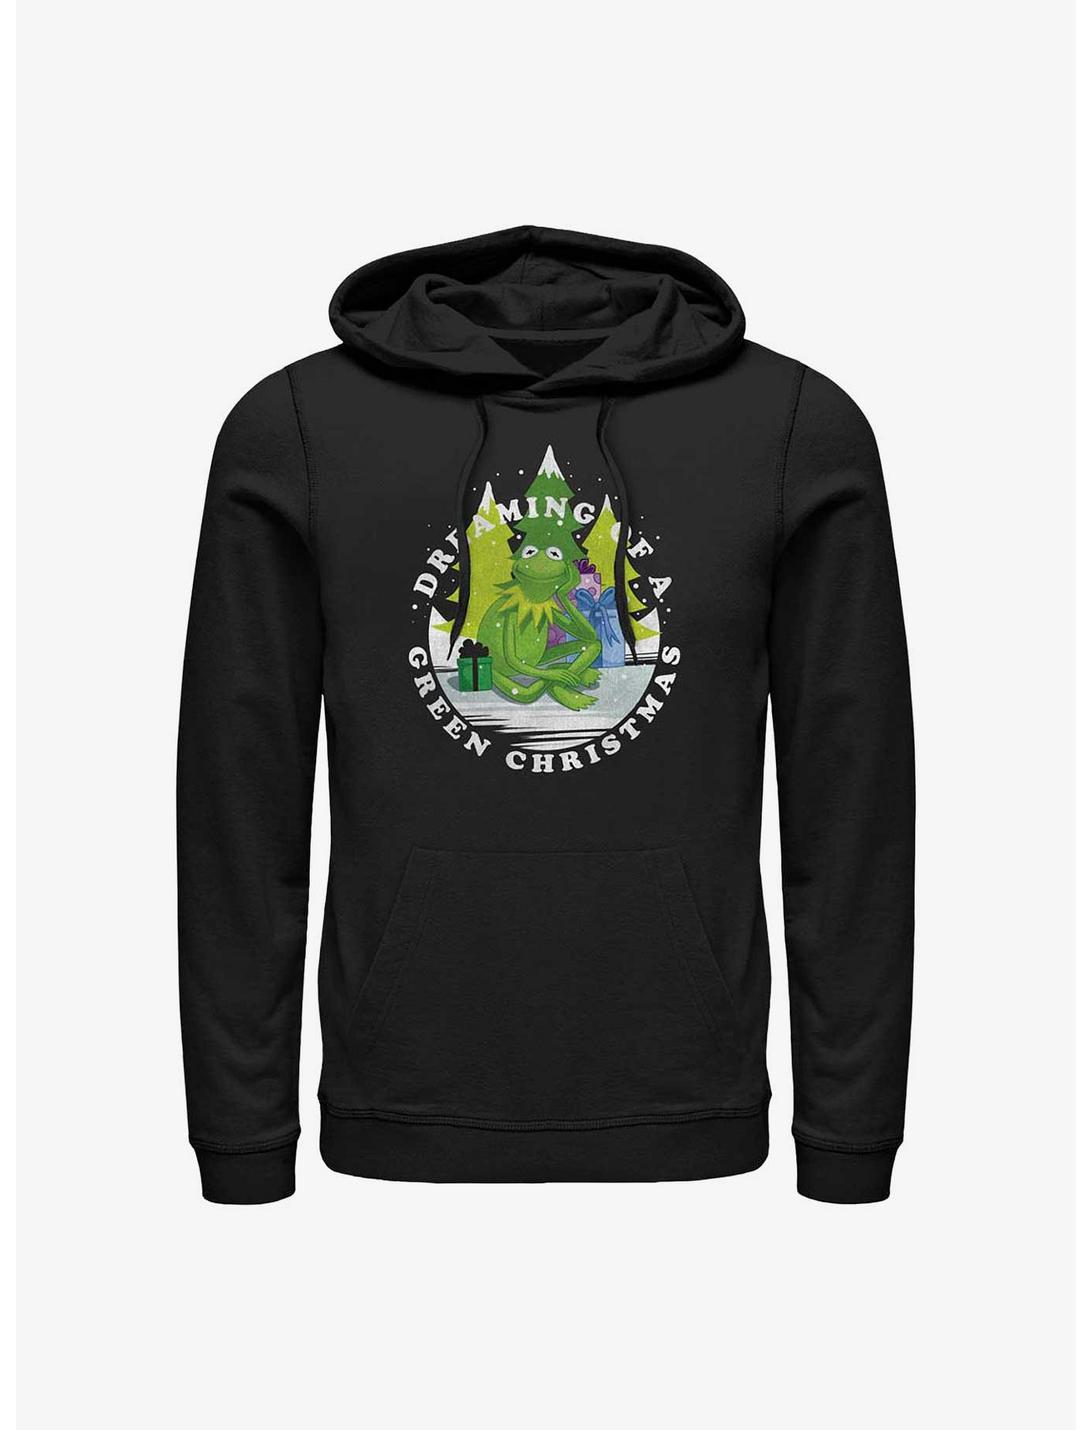 Disney The Muppets Dreaming Of A Green Christmas Hoodie, BLACK, hi-res